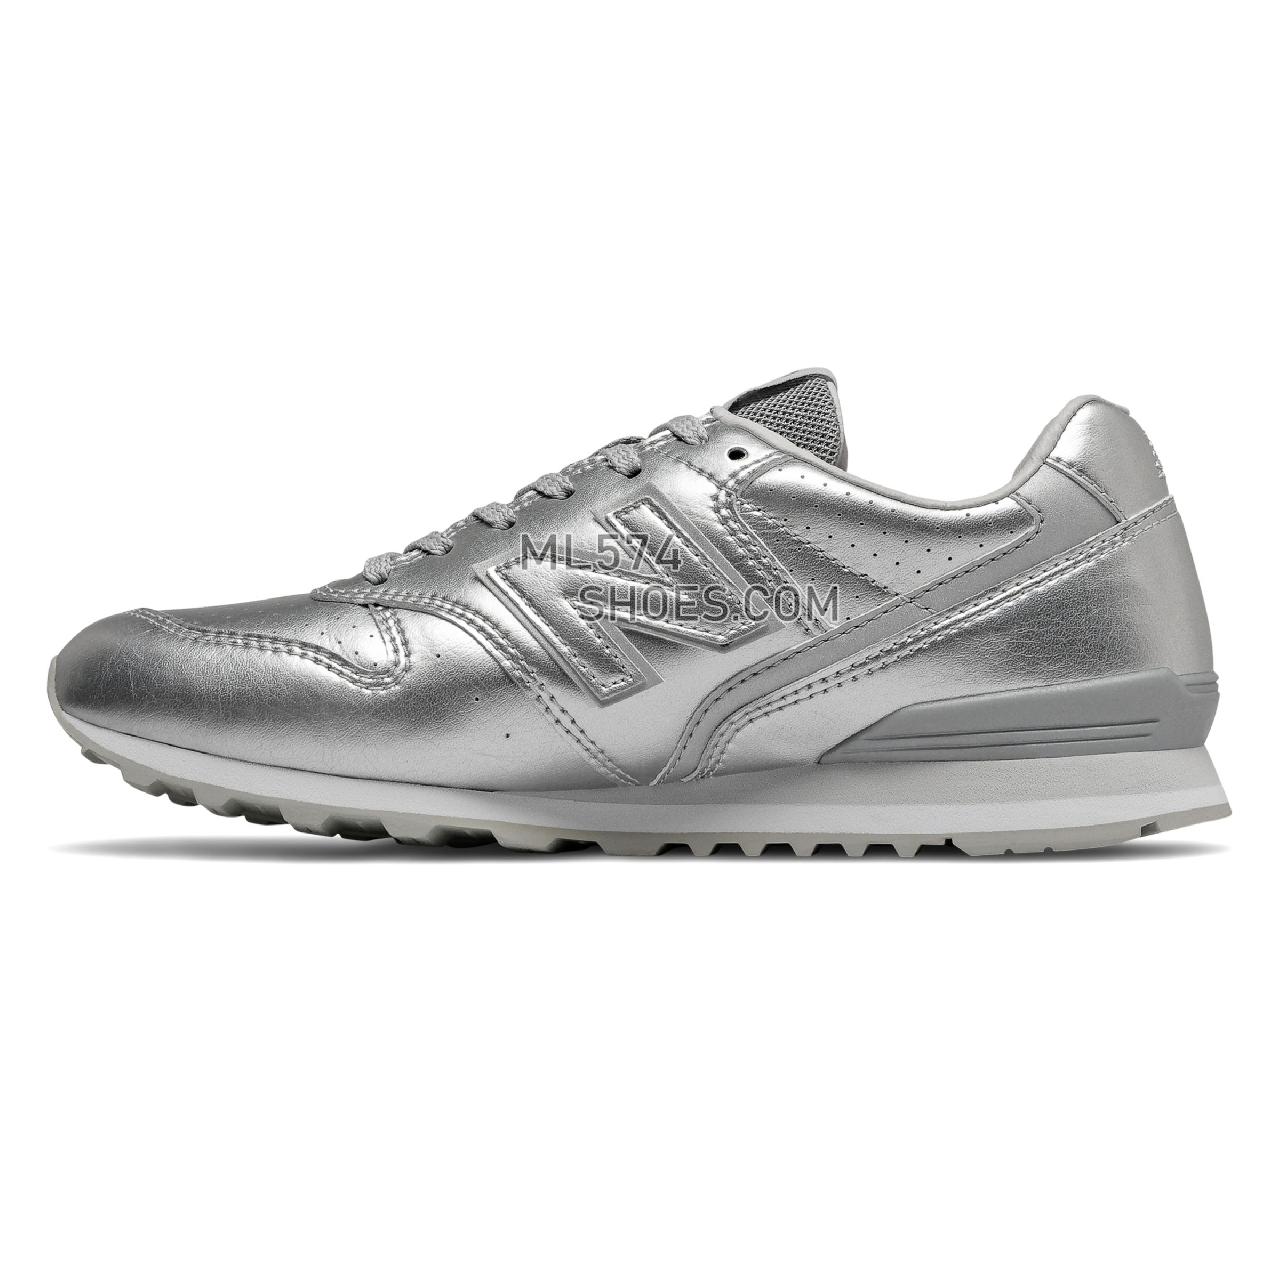 New Balance 996 - Women's 996 Classic - Silver with Munsell White - WL996ALS